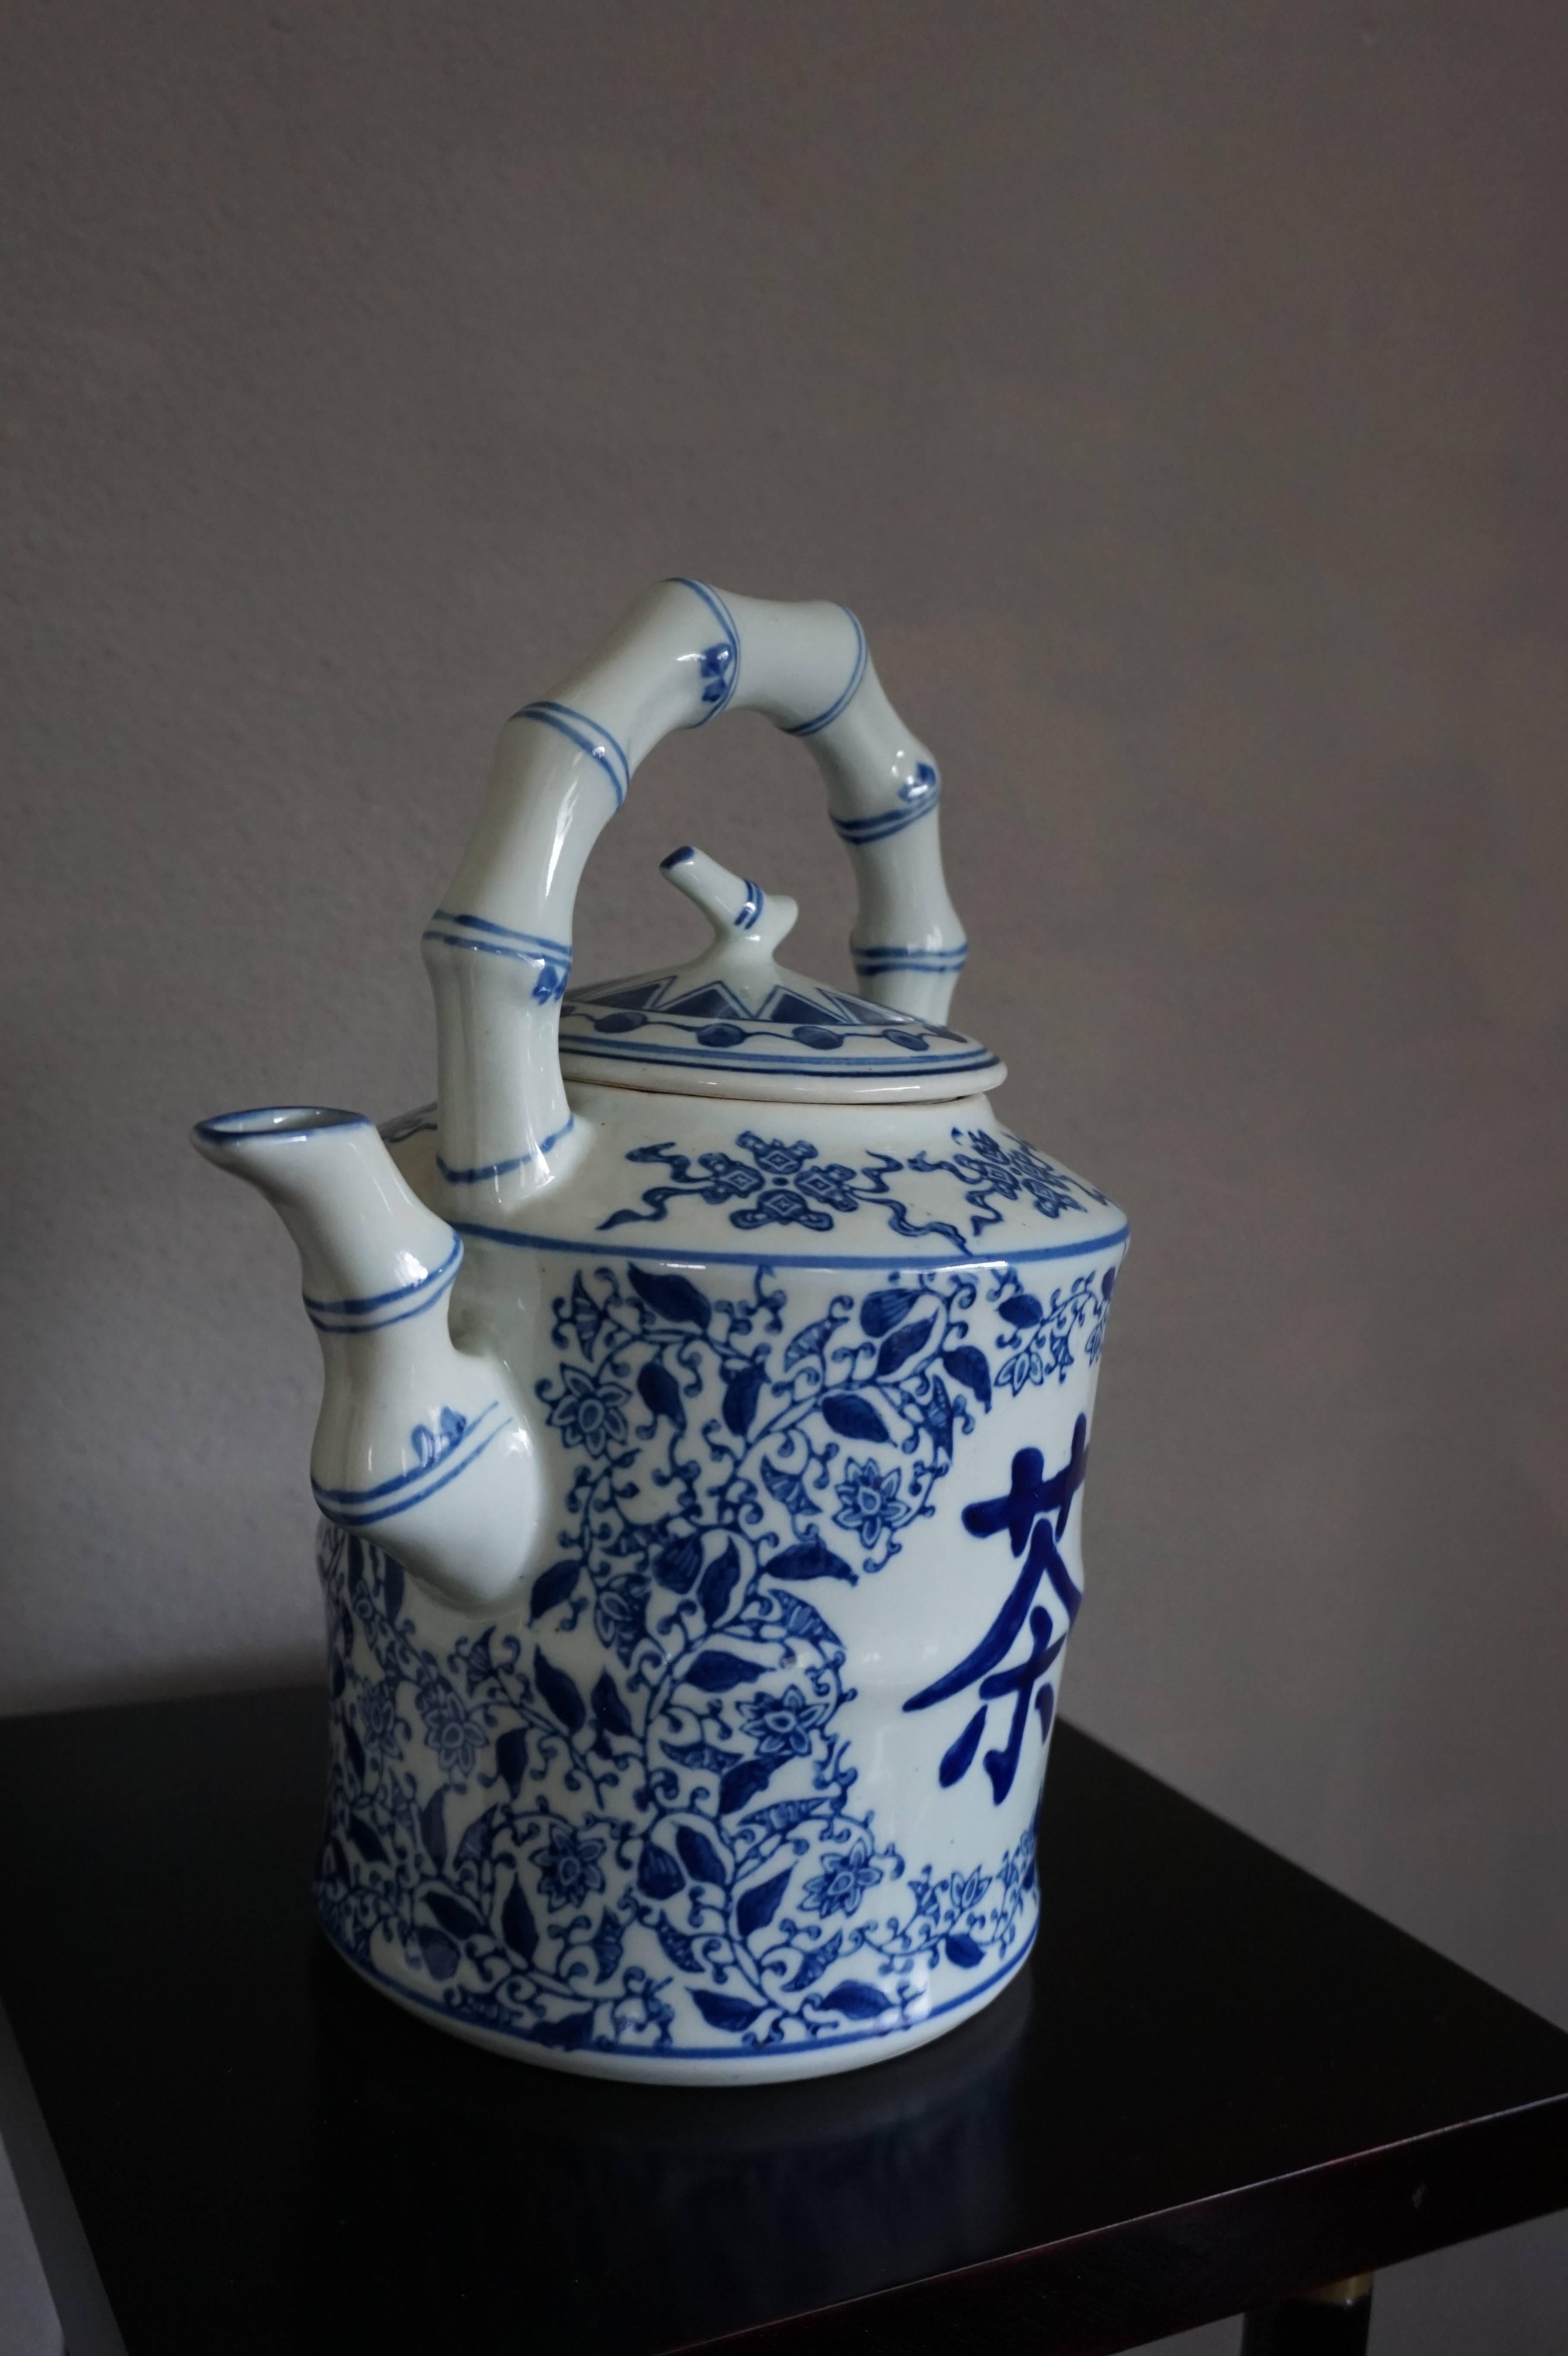 Good size and stylish Chinese teapot. 

This blue and white ceramic teapot embodies much of the ancient tradition of tea drinking in China. It may have never been used, because it is as clean as a whistle. The bamboo pattern and the glazed surface